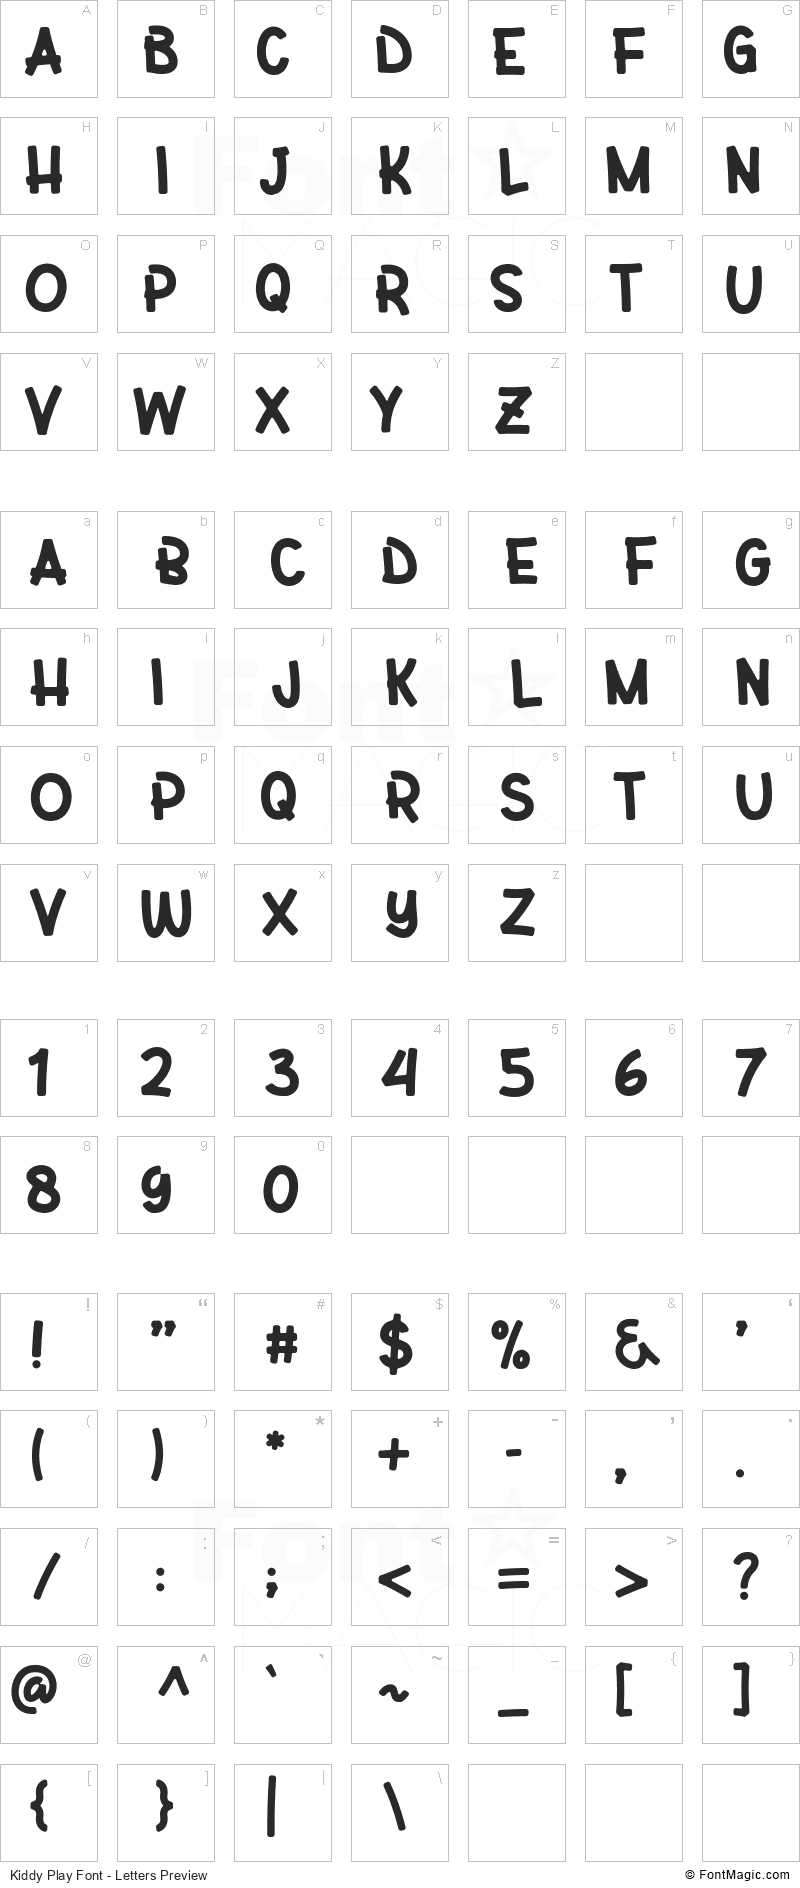 Kiddy Play Font - All Latters Preview Chart